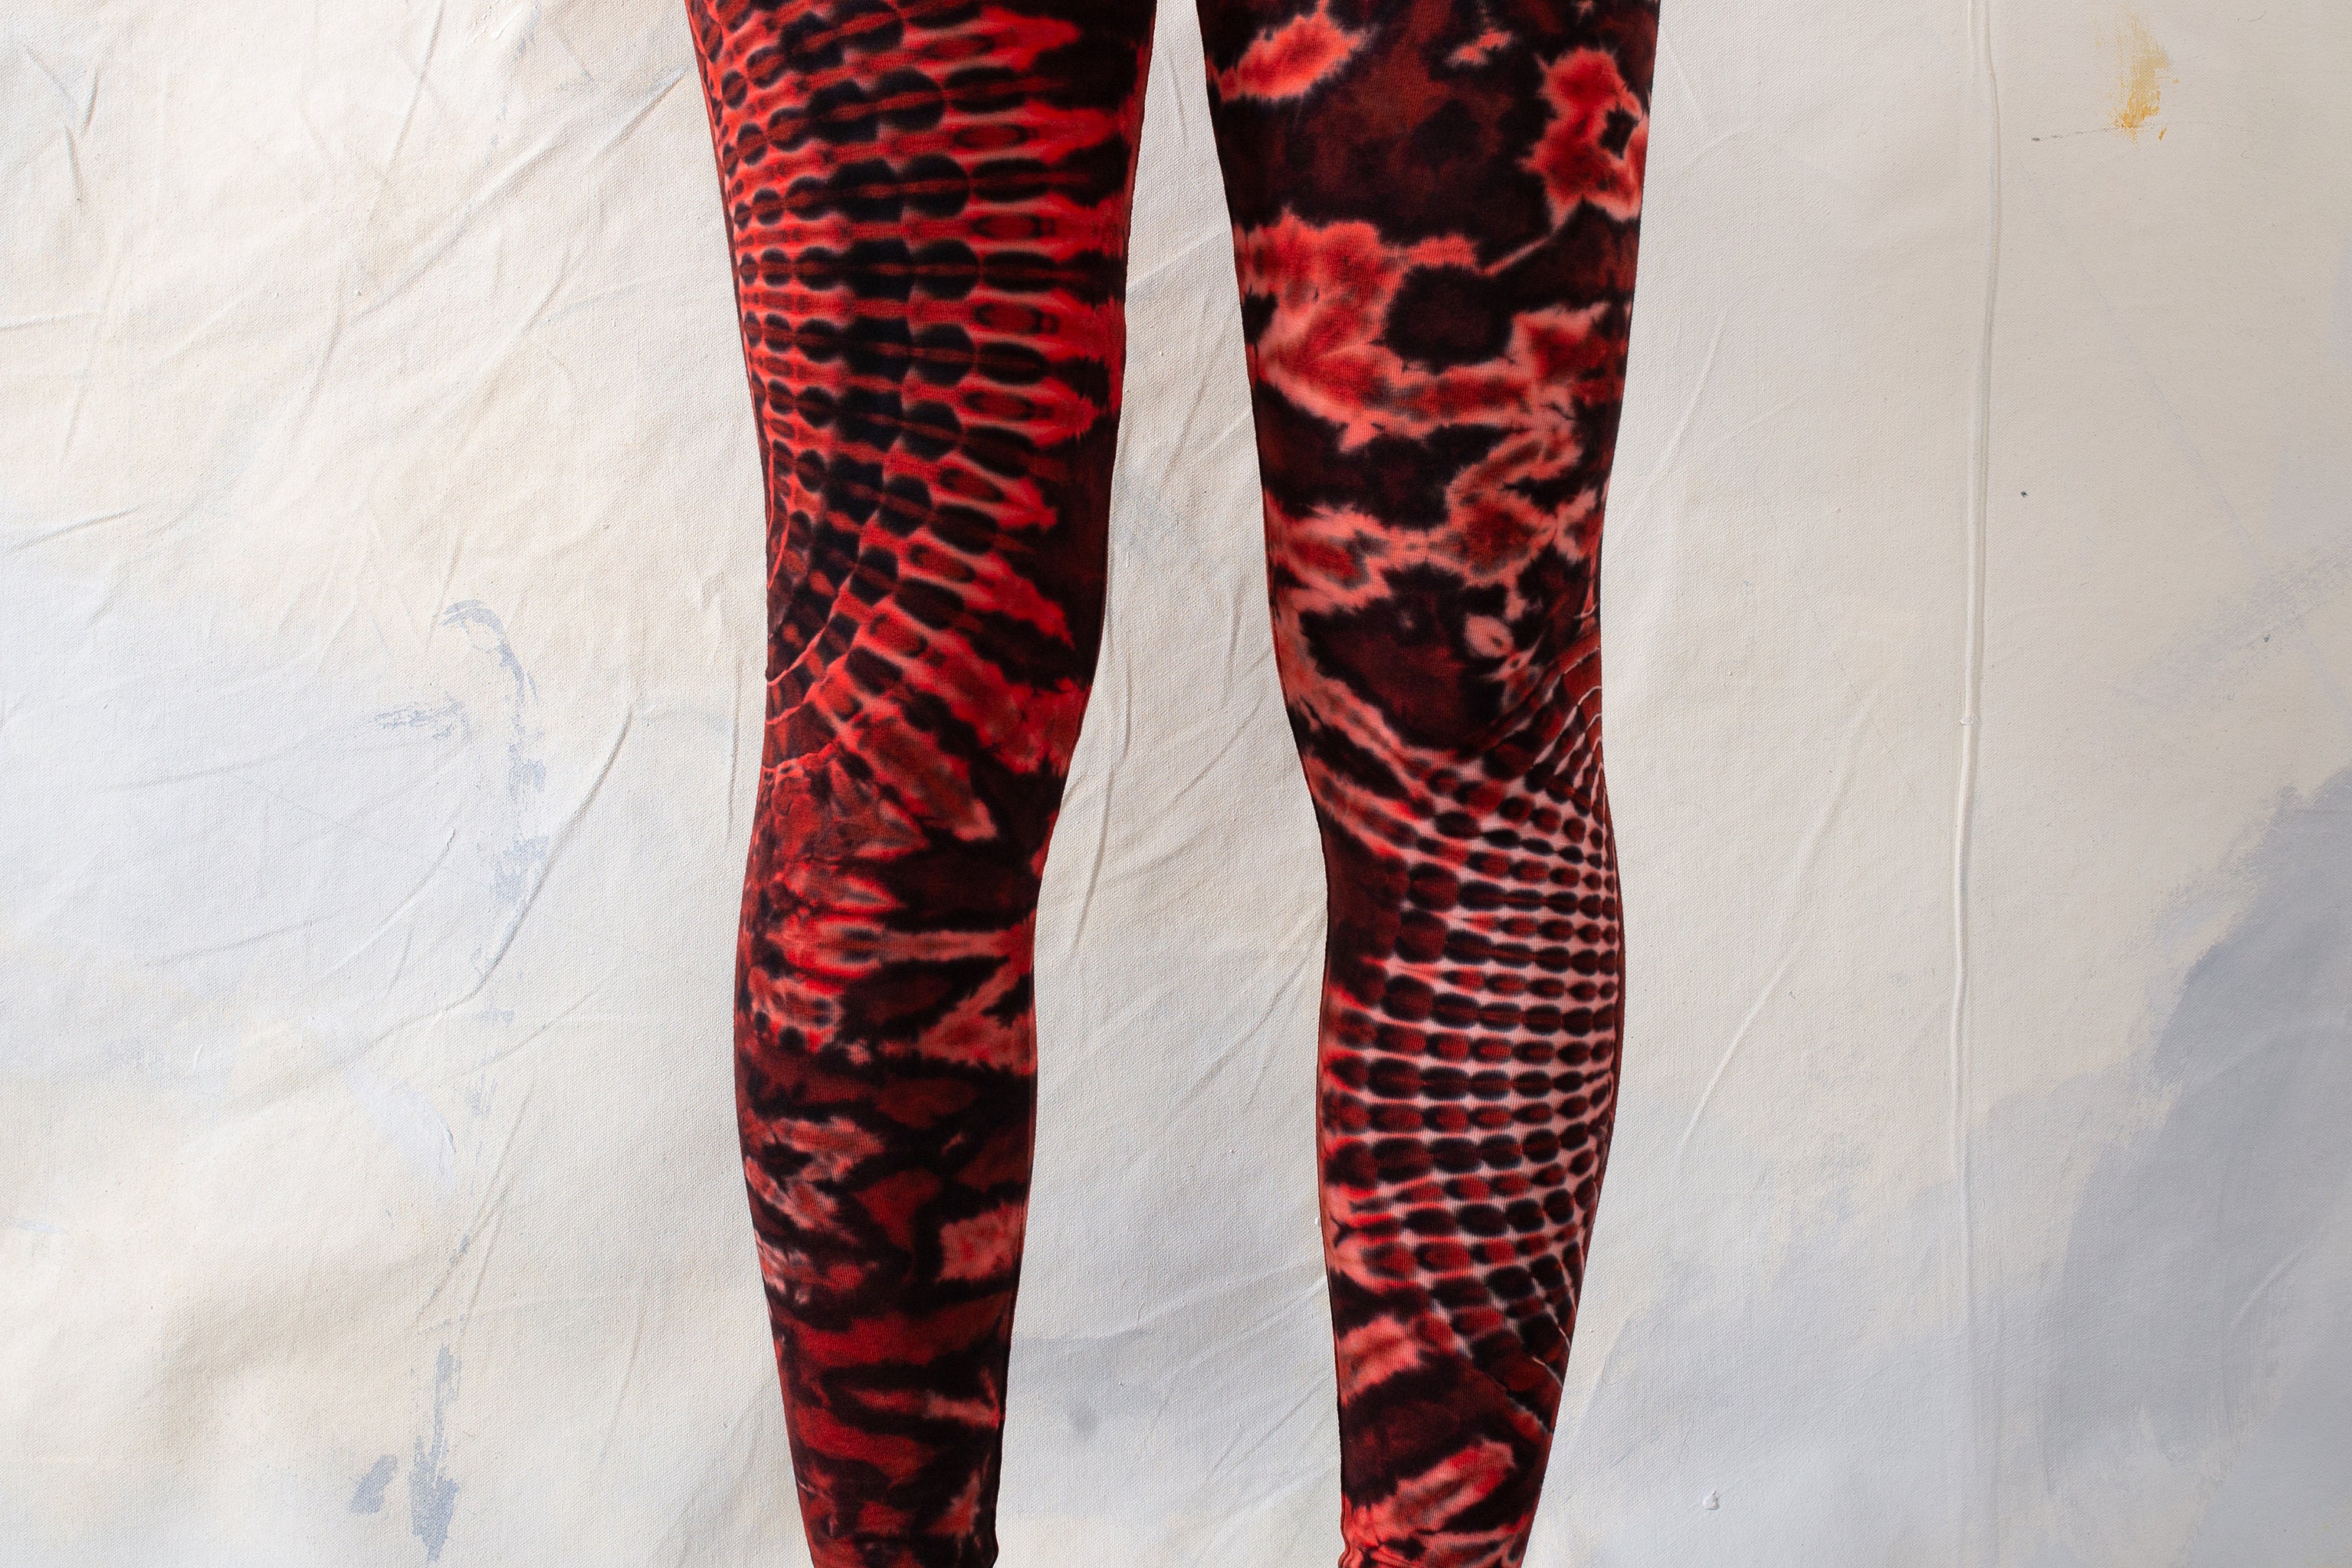 LEGGINGS With an Abstract Floral Pattern Batik, Tie-dye Unisex